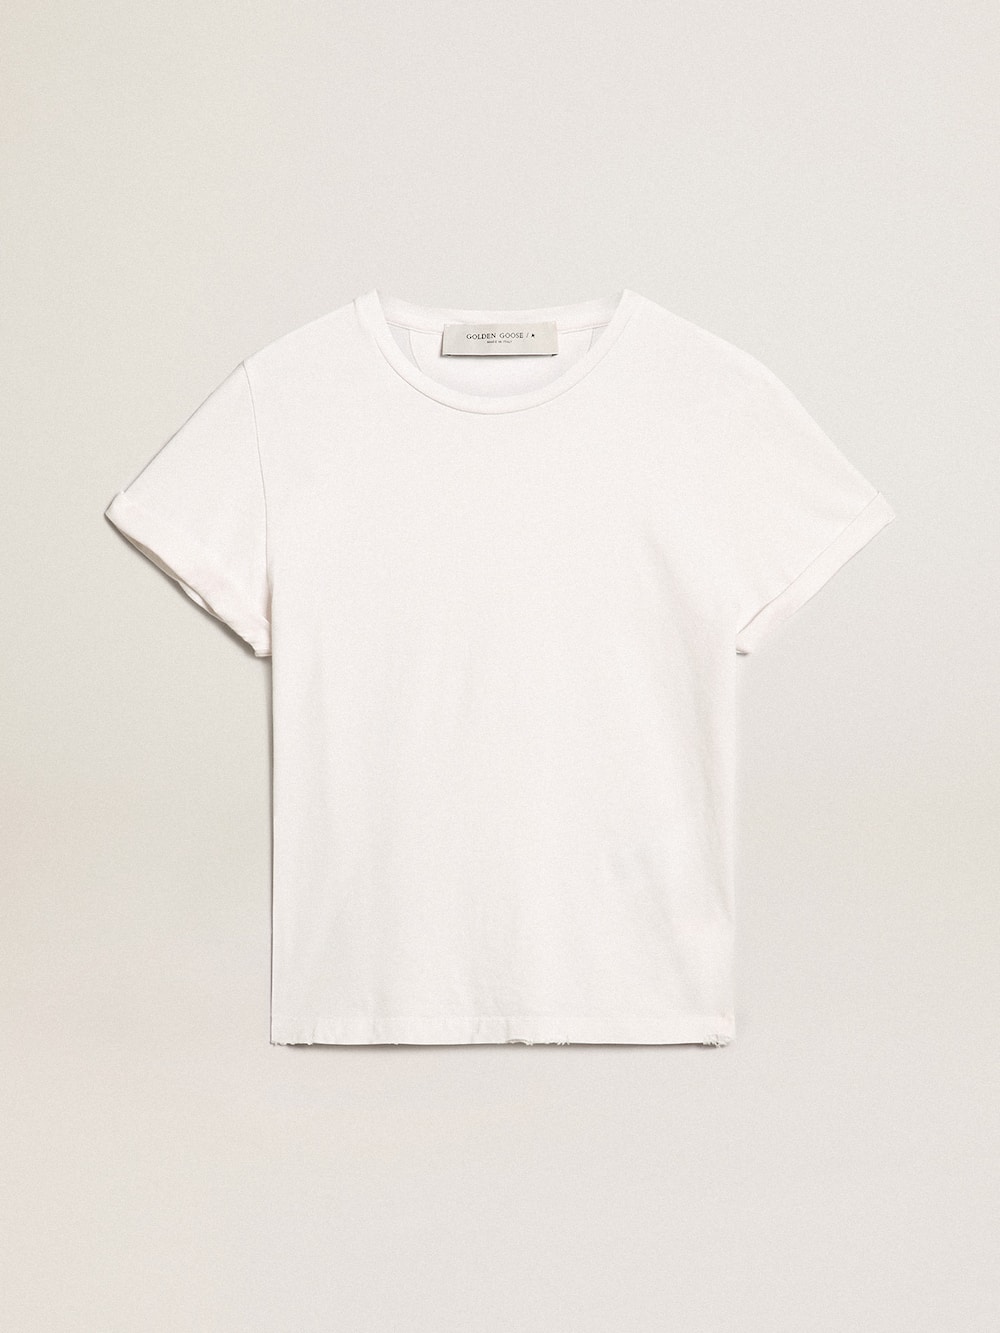 Golden Goose - Women's white T-shirt with distressed treatment in 